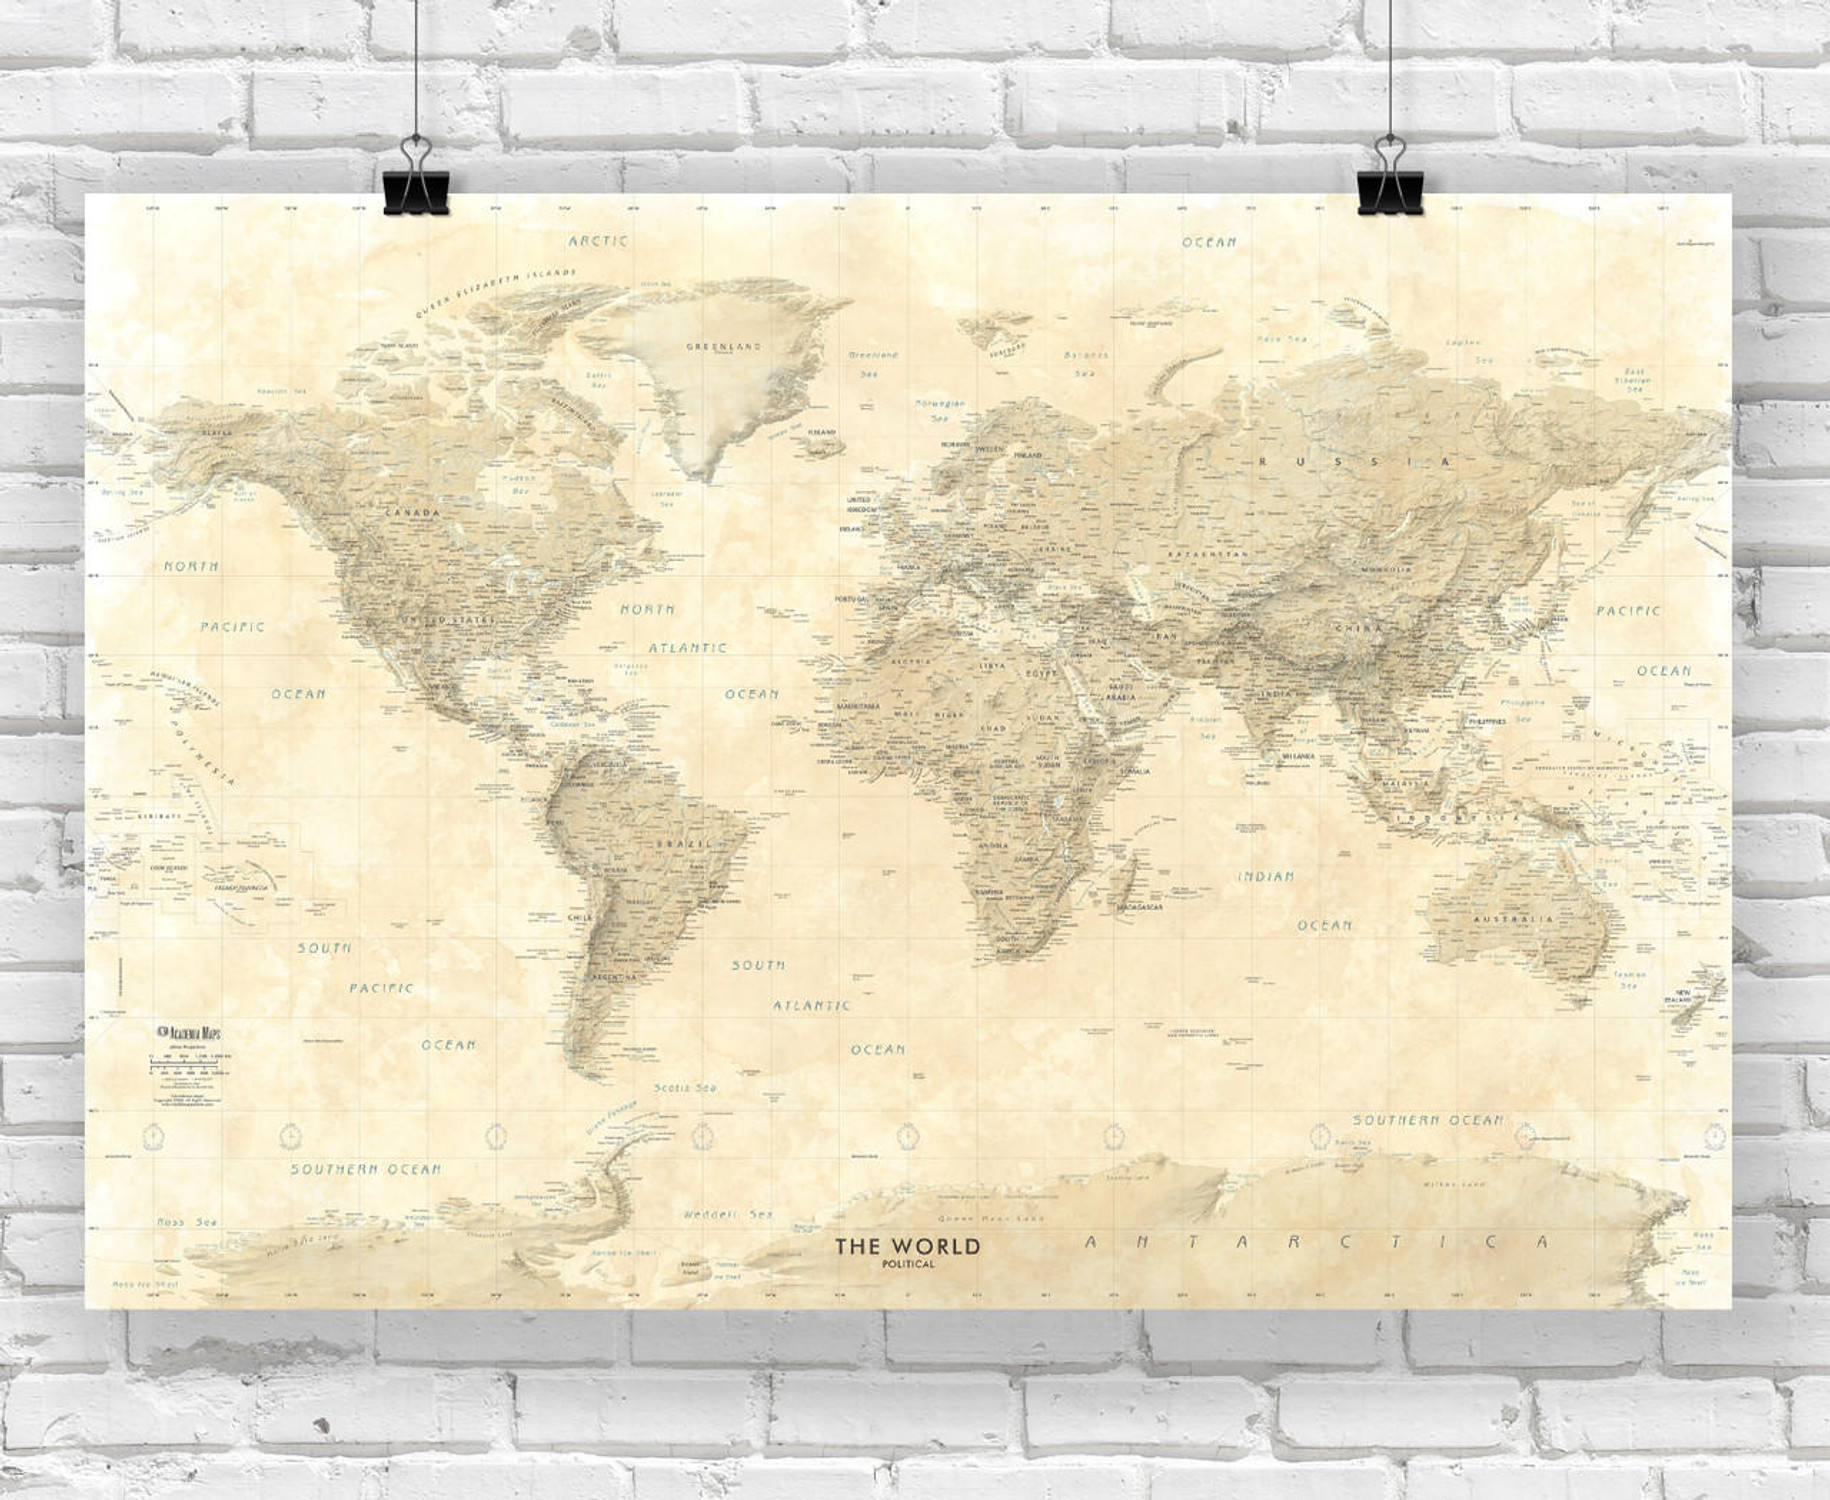 Sepia Tones World Political Map Wall Map, image 1, World Maps Online